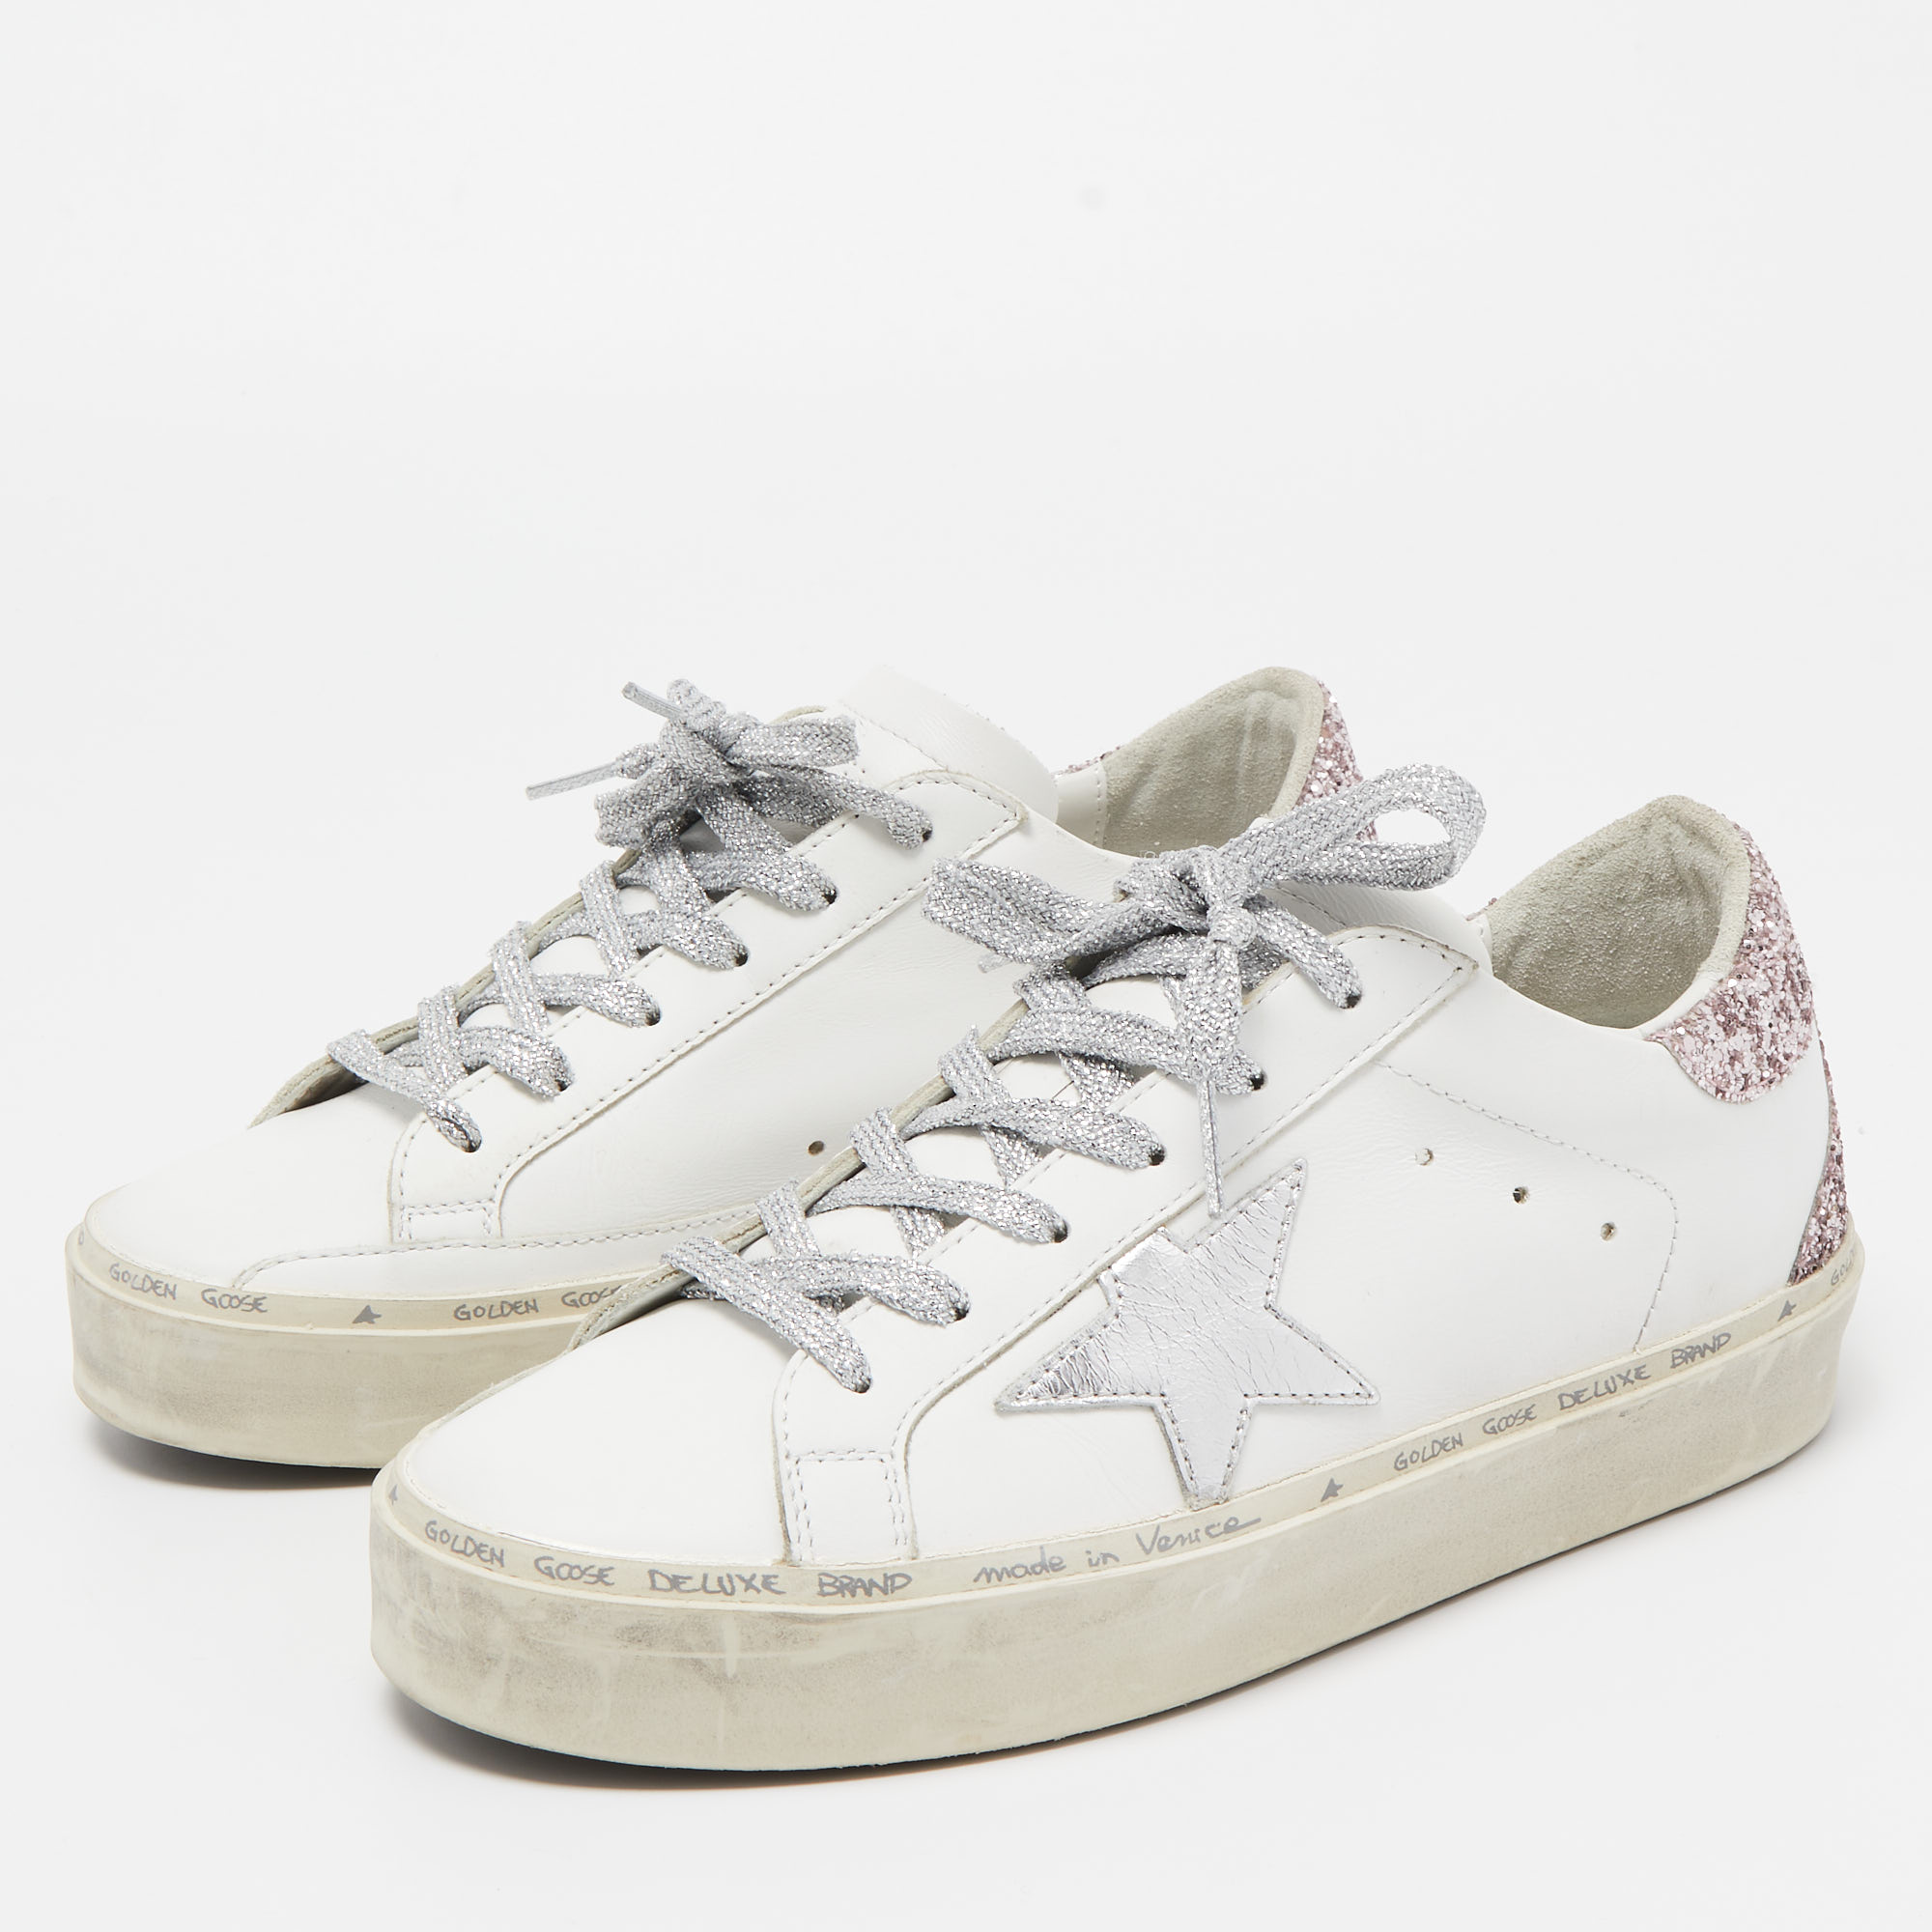 

Golden Goose White/Pink Leather and Glitter Hi Star Sneakers Size